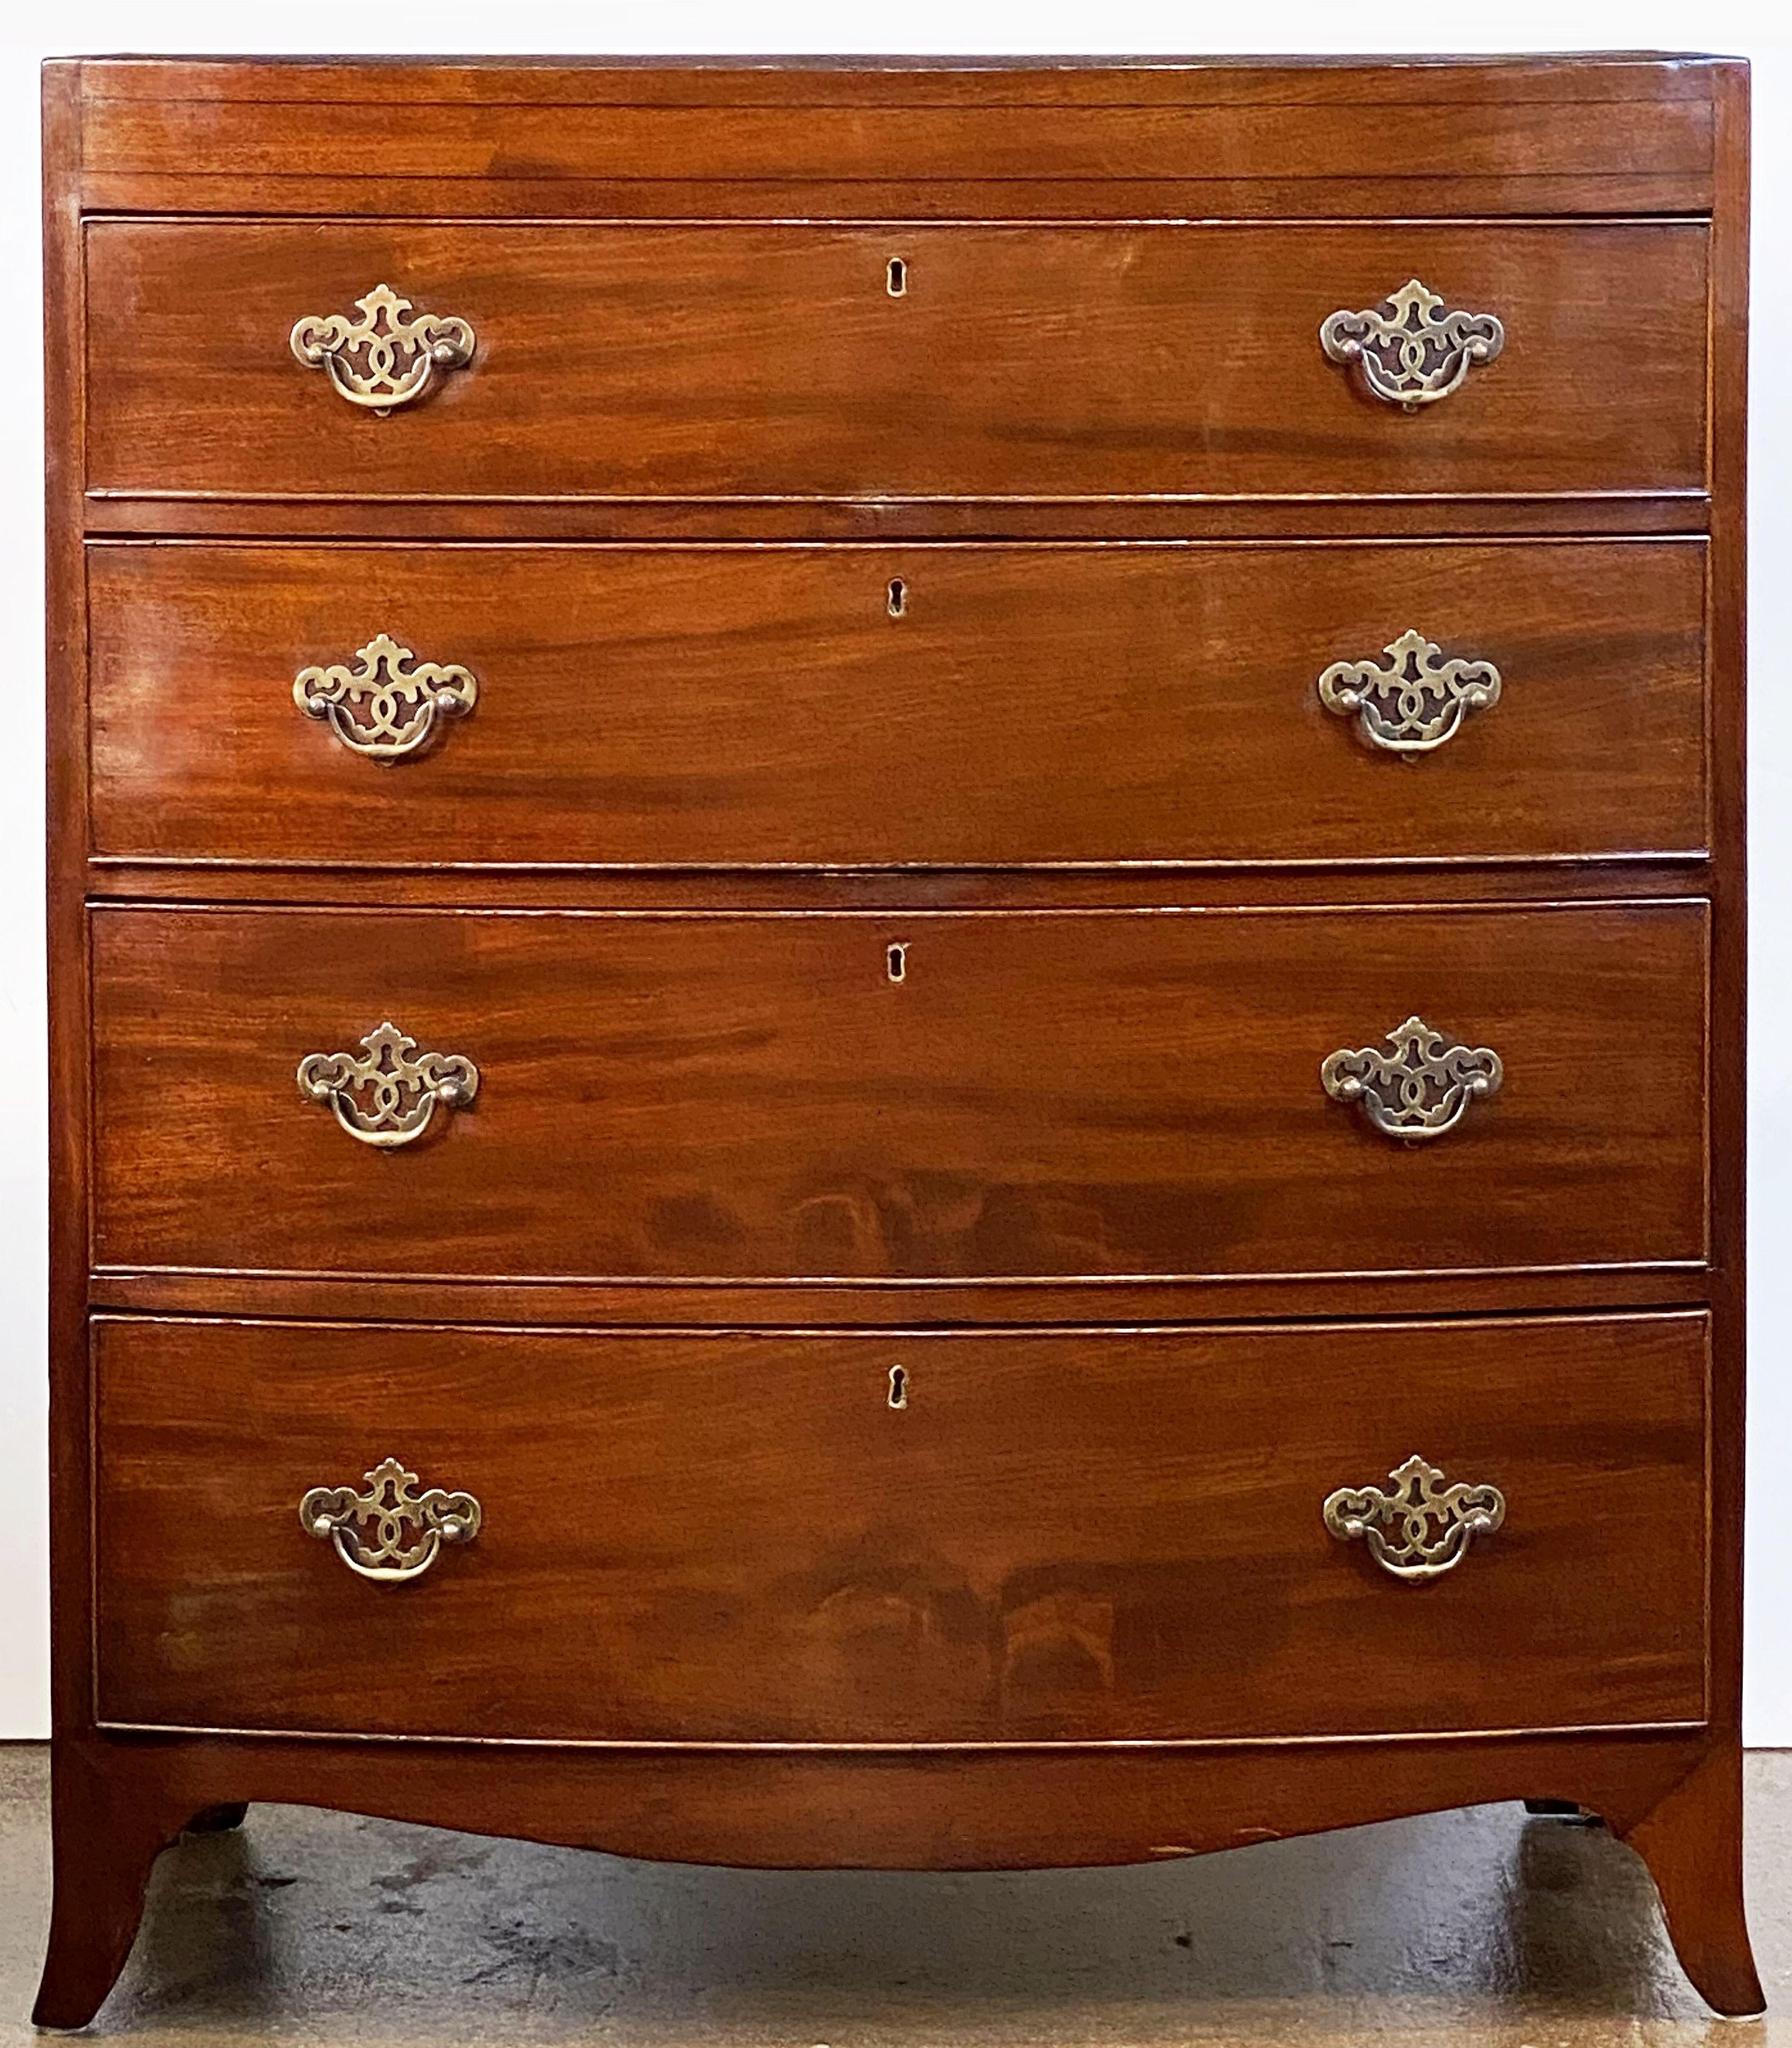 A fine English bow-front chest of mahogany featuring a bowed top over four beaded drawers with brass pulls, and set upon an apron base with splay feet.
 